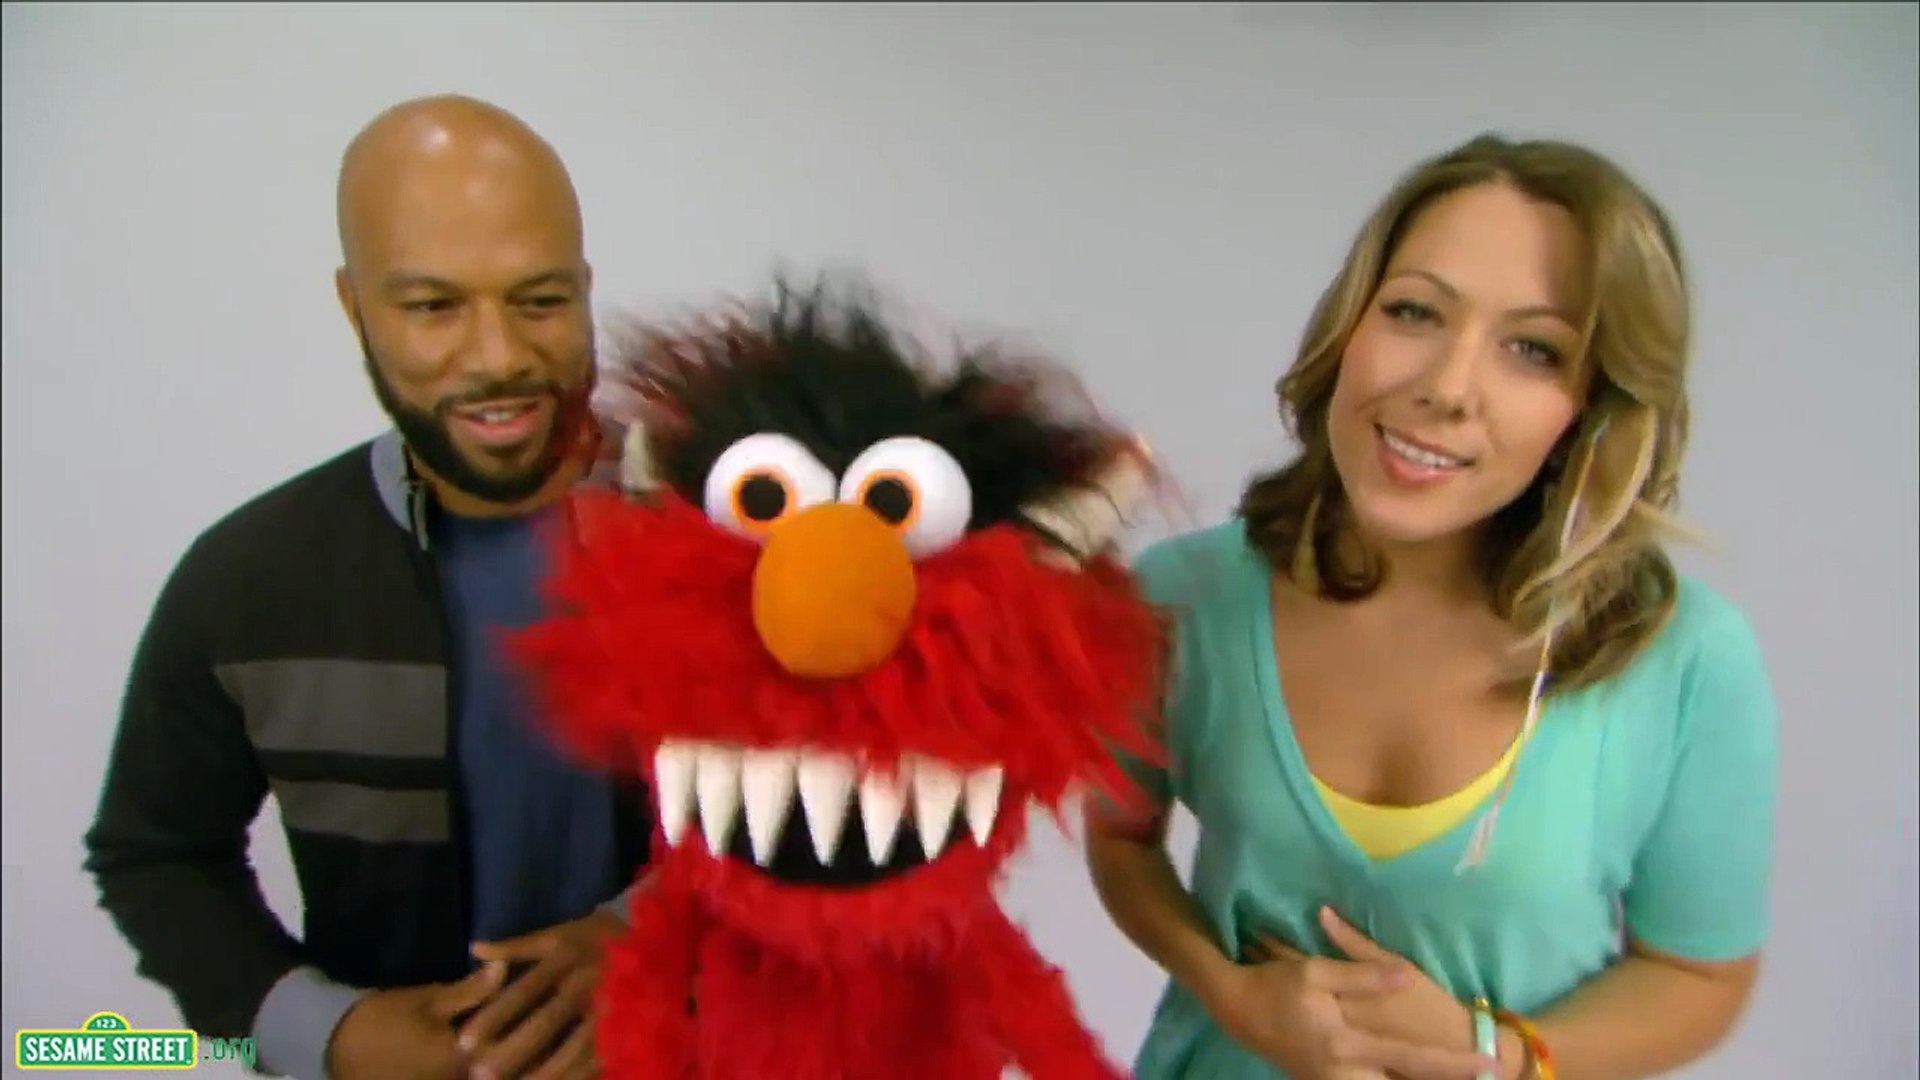 Sesame Street: Common and Colbie Caillat Belly Breathe with Elmo -  Dailymotion Video